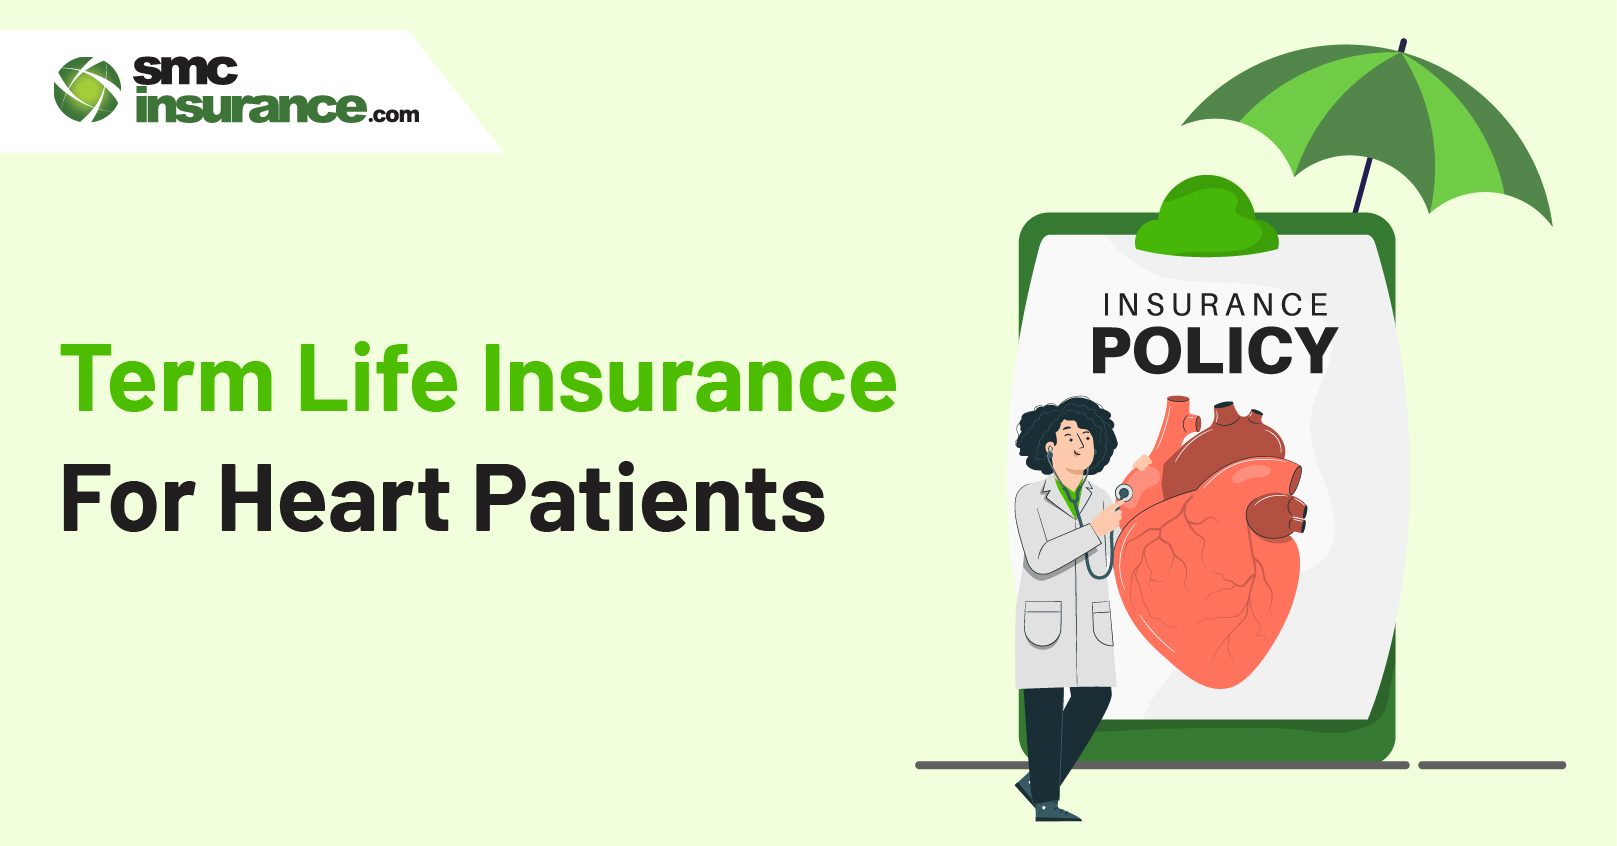 Term Life Insurance For Heart Patients